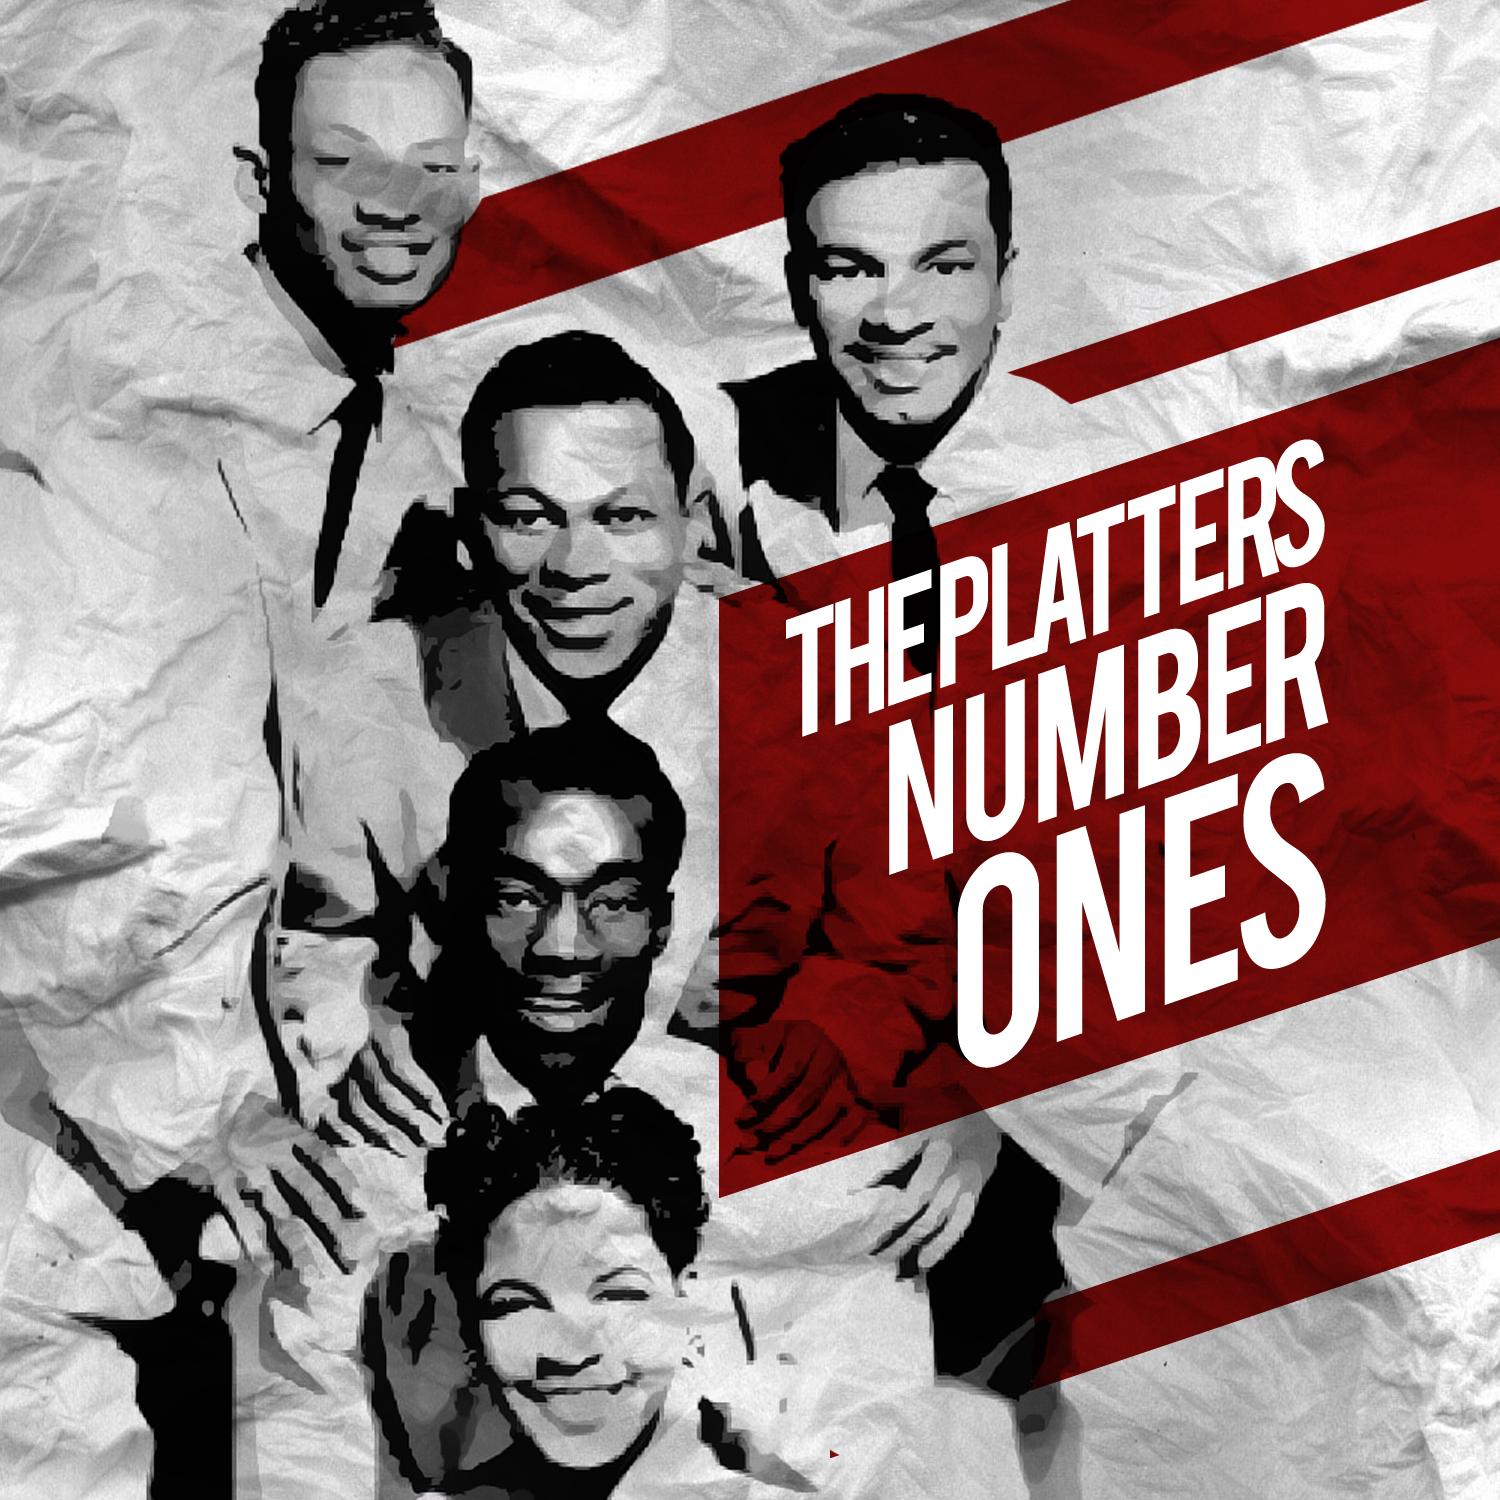 The Platters Number Ones